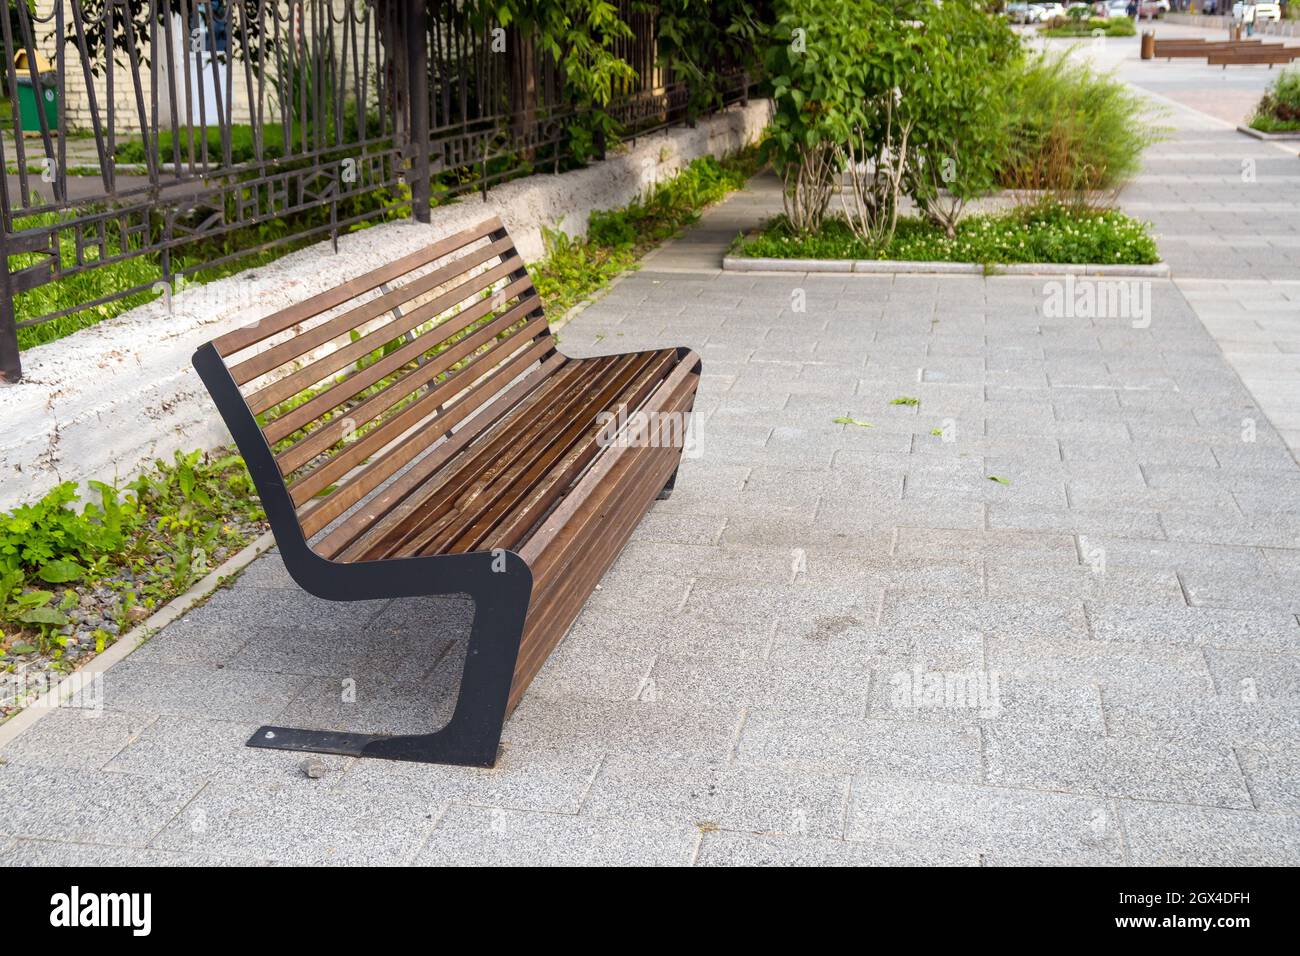 An interestingly designed street bench stands on the asphalt next to a metal fence. Stock Photo